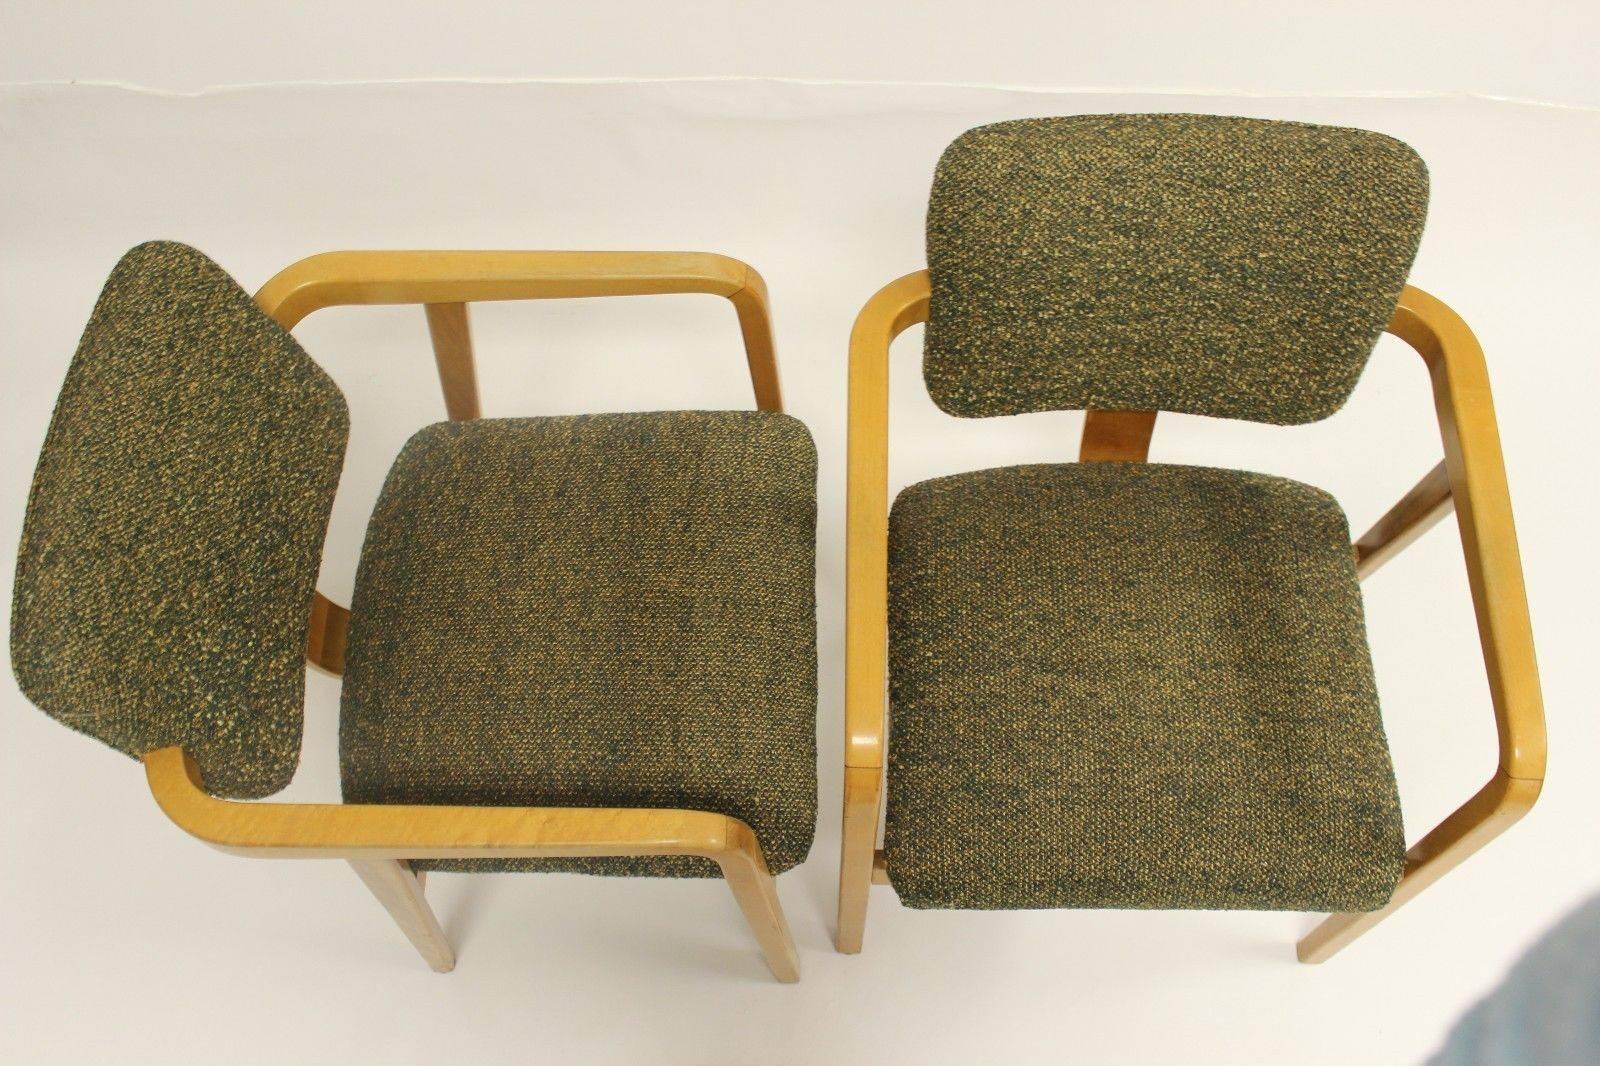 Mid-Century Modern Rare Pair of Model 4663 Armchairs Designed by George Nelson for Herman Miller